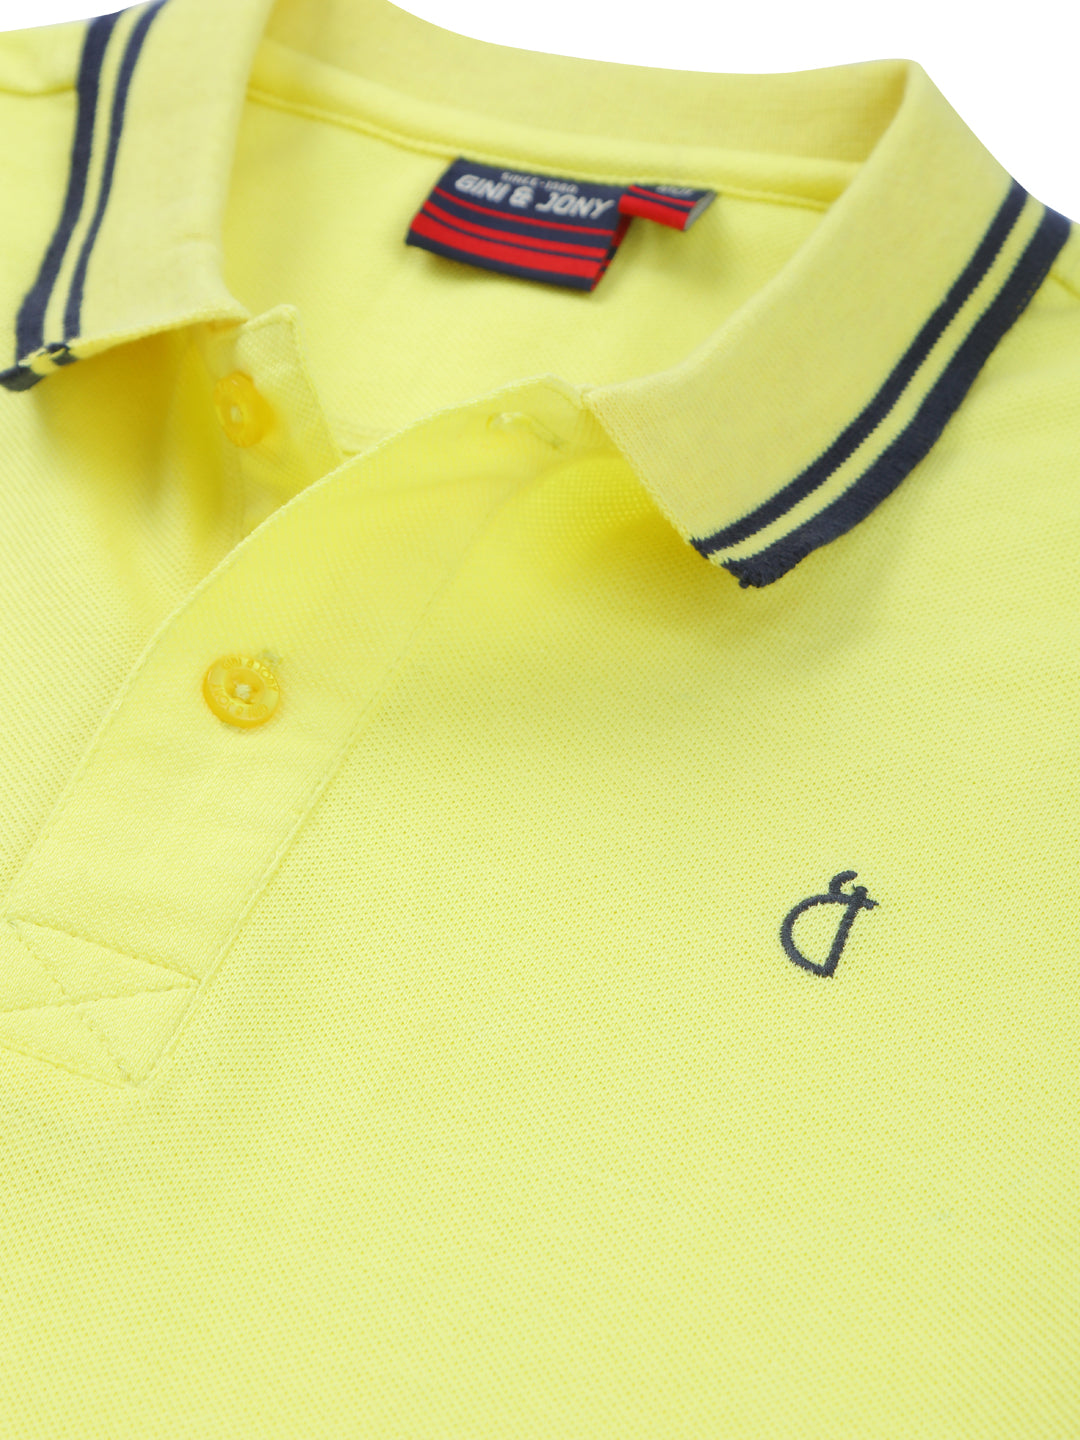 Boys Yellow Cotton Solid Polo T-Shirt